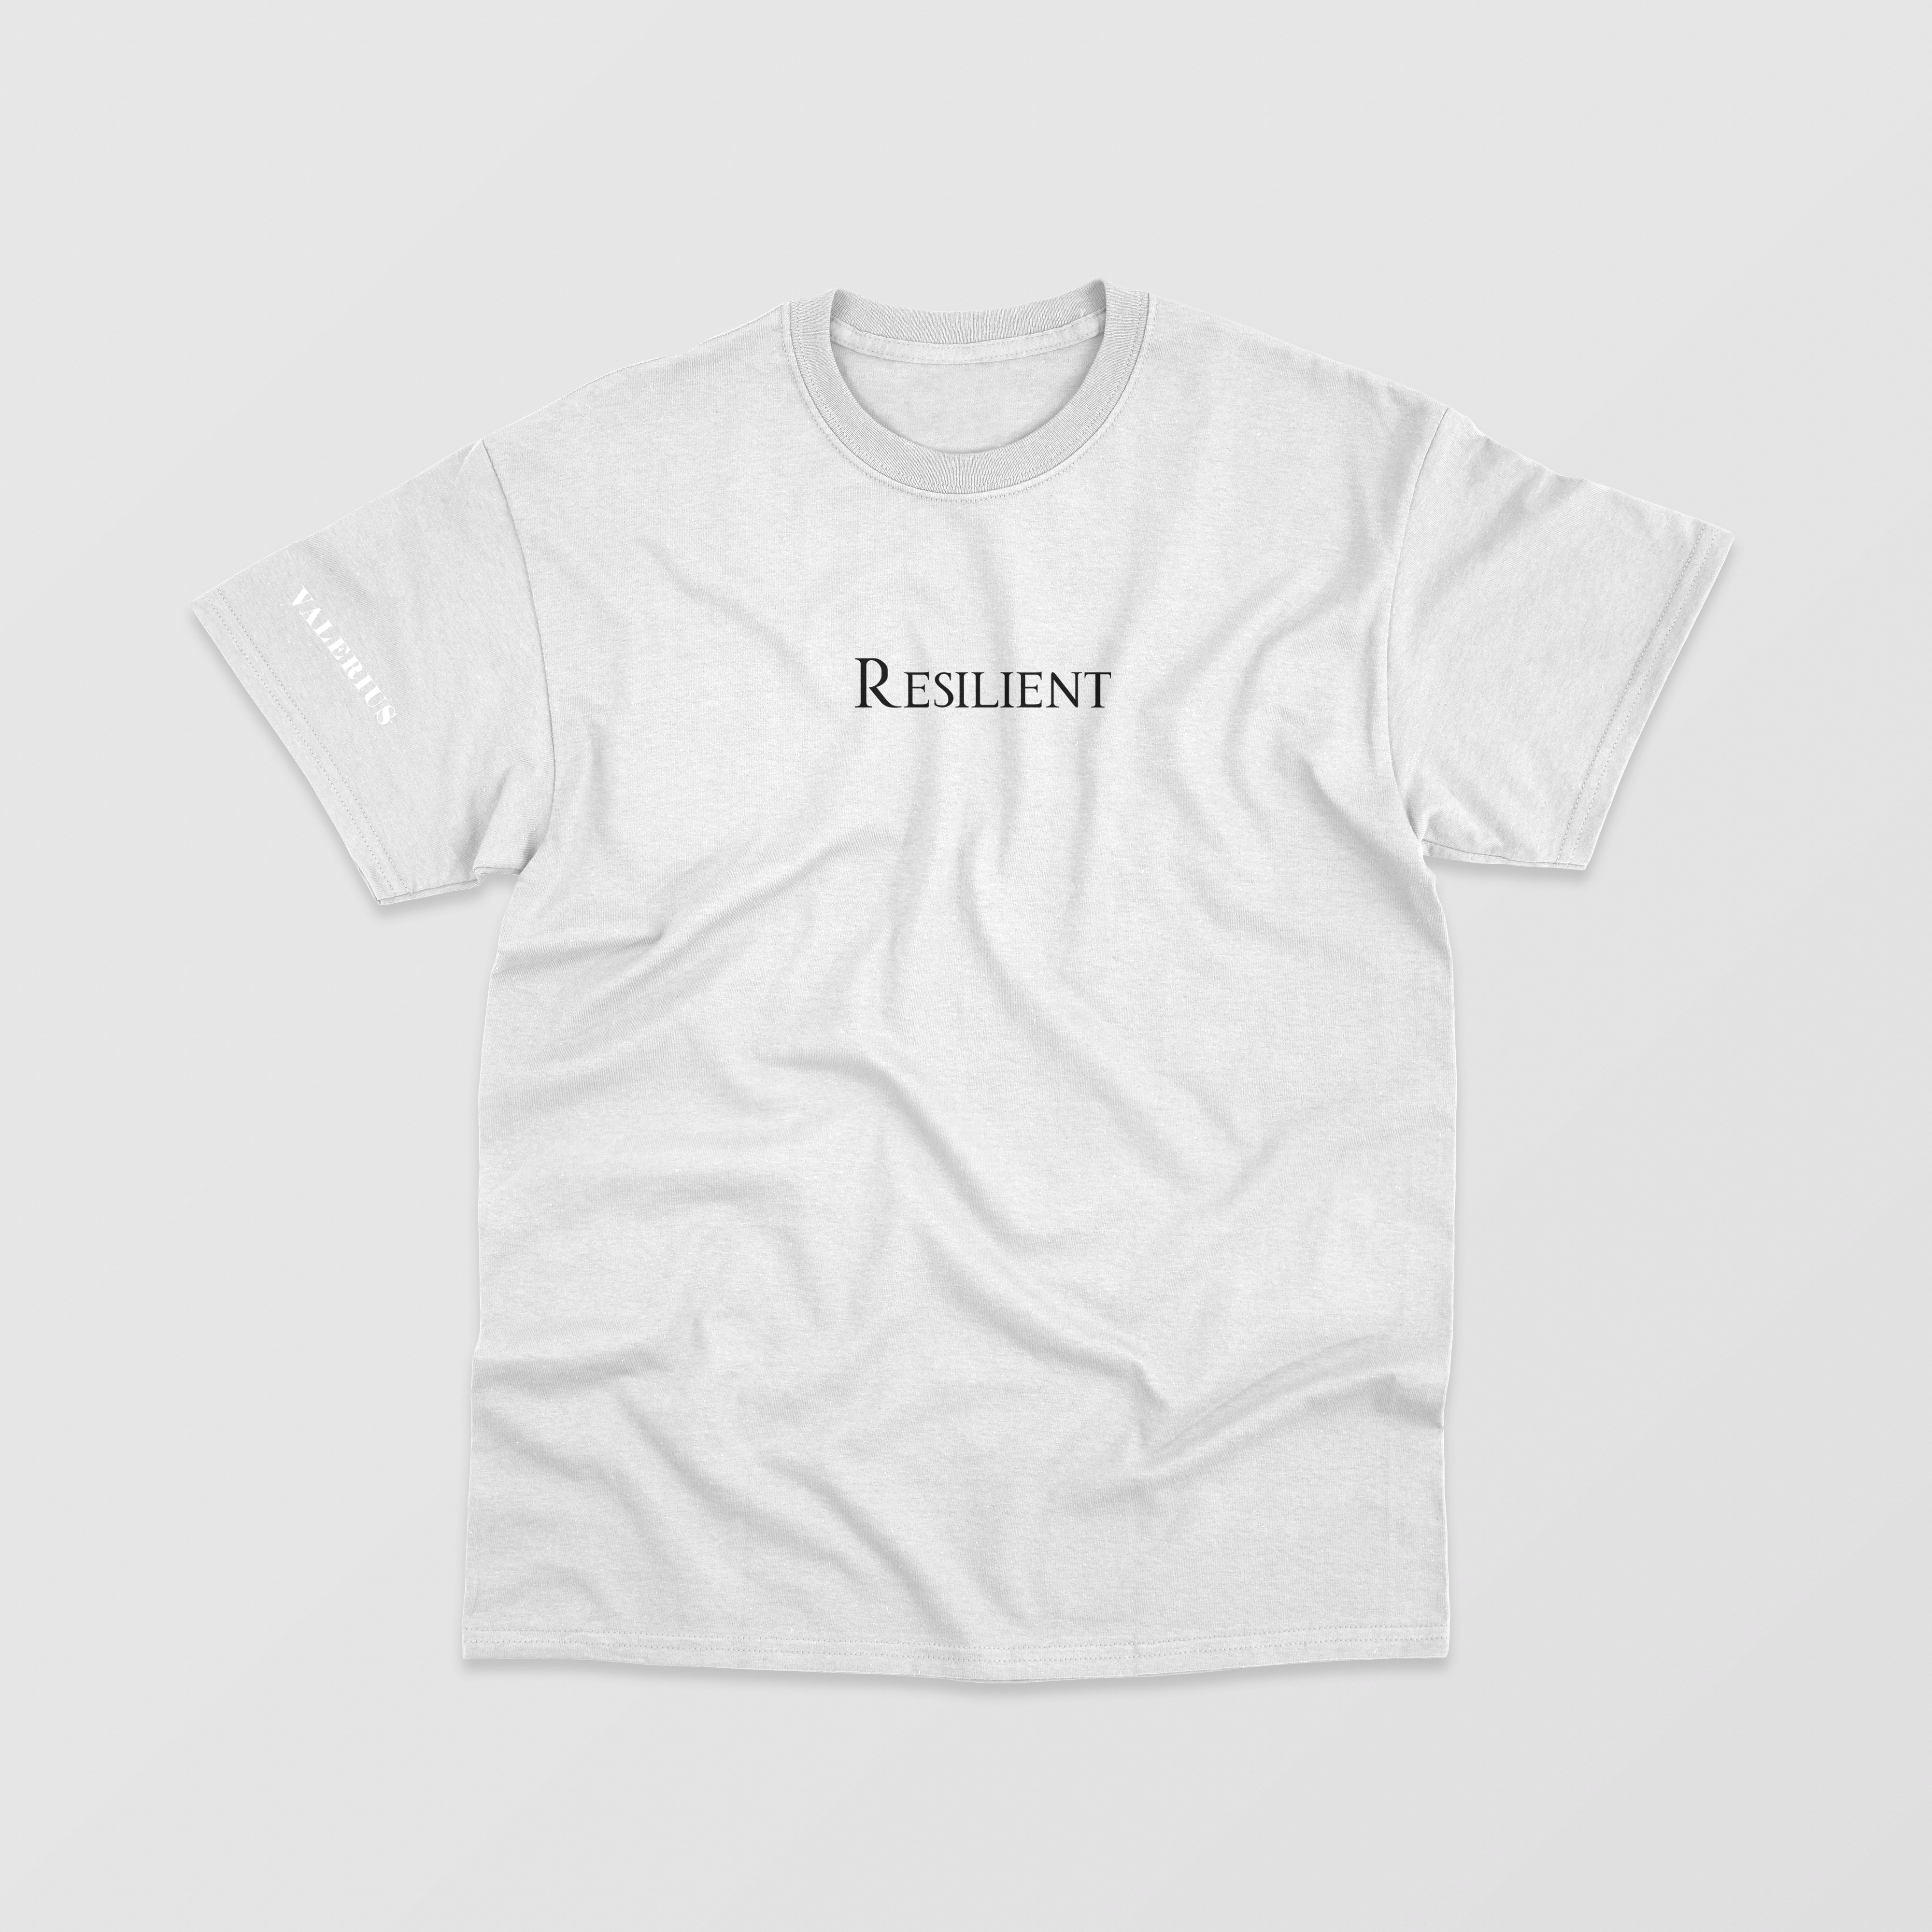 Resilience - White T-Shirt